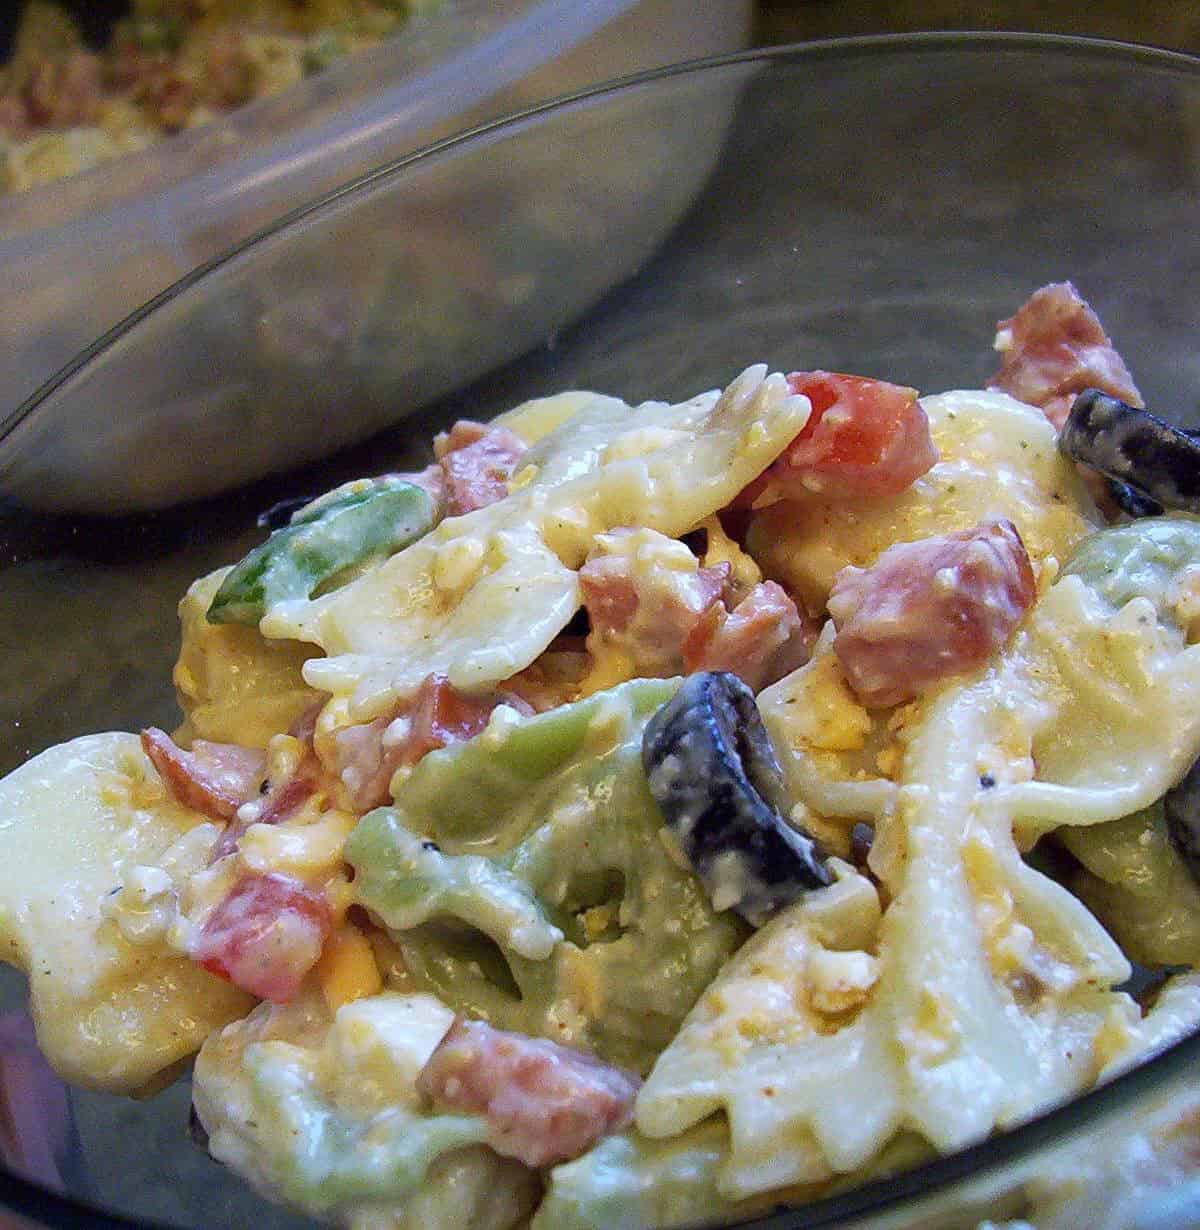  This pasta salad is so easy to make, you'll have time to enjoy the party too.